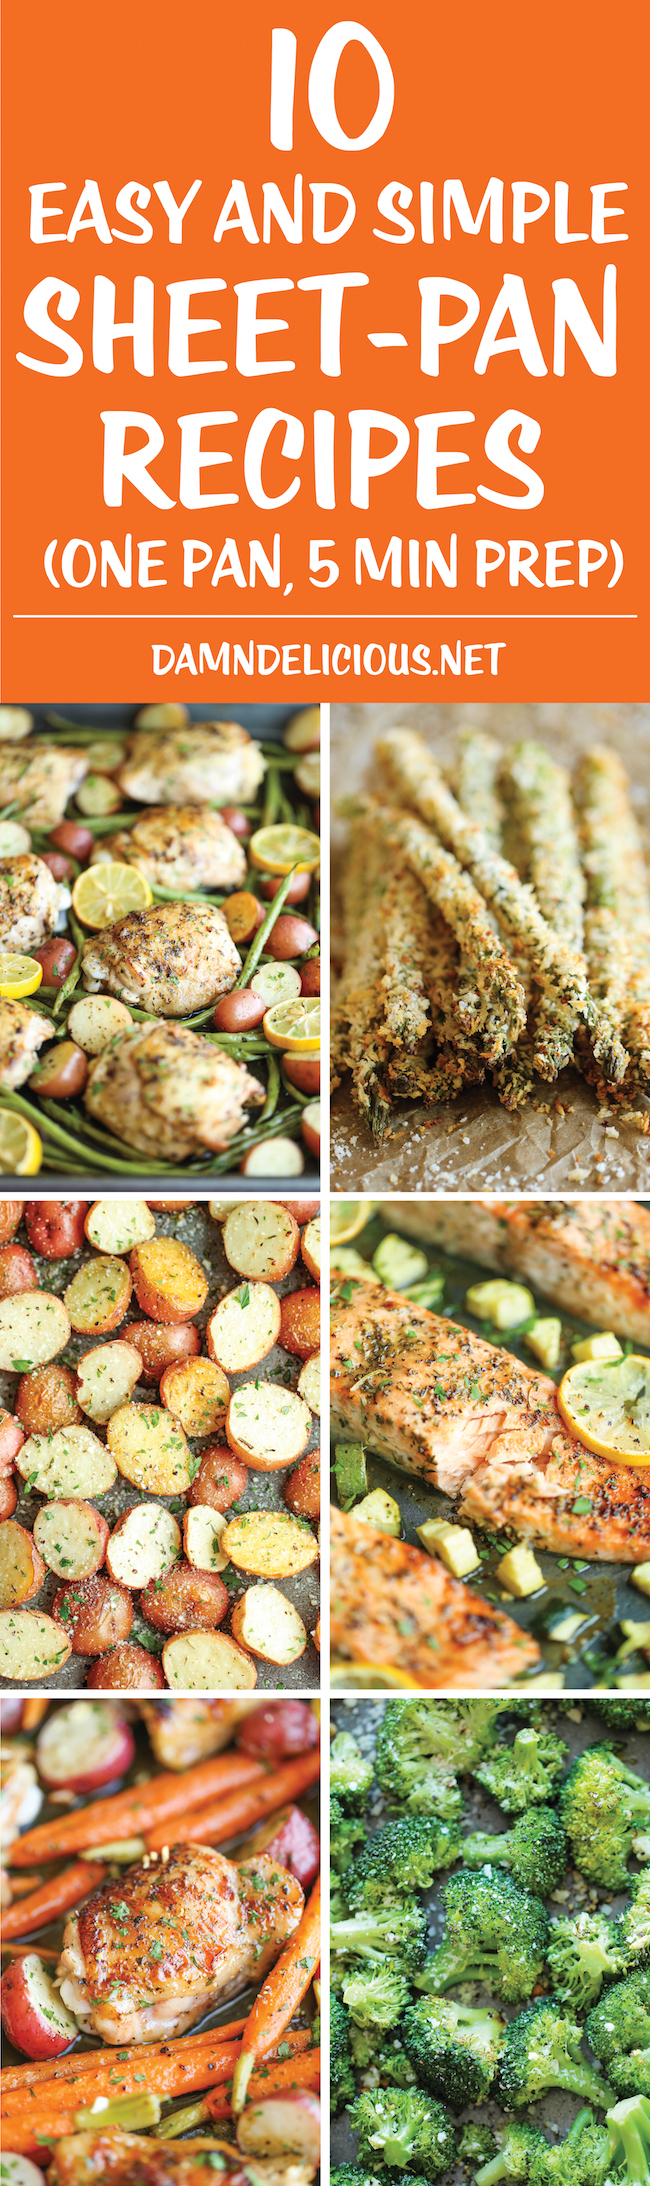 10 Easy and Simple Sheet-Pan Recipes - From appetizers to sides to main dishes, these recipes are so easy to make, and you only have a single pan to clean!